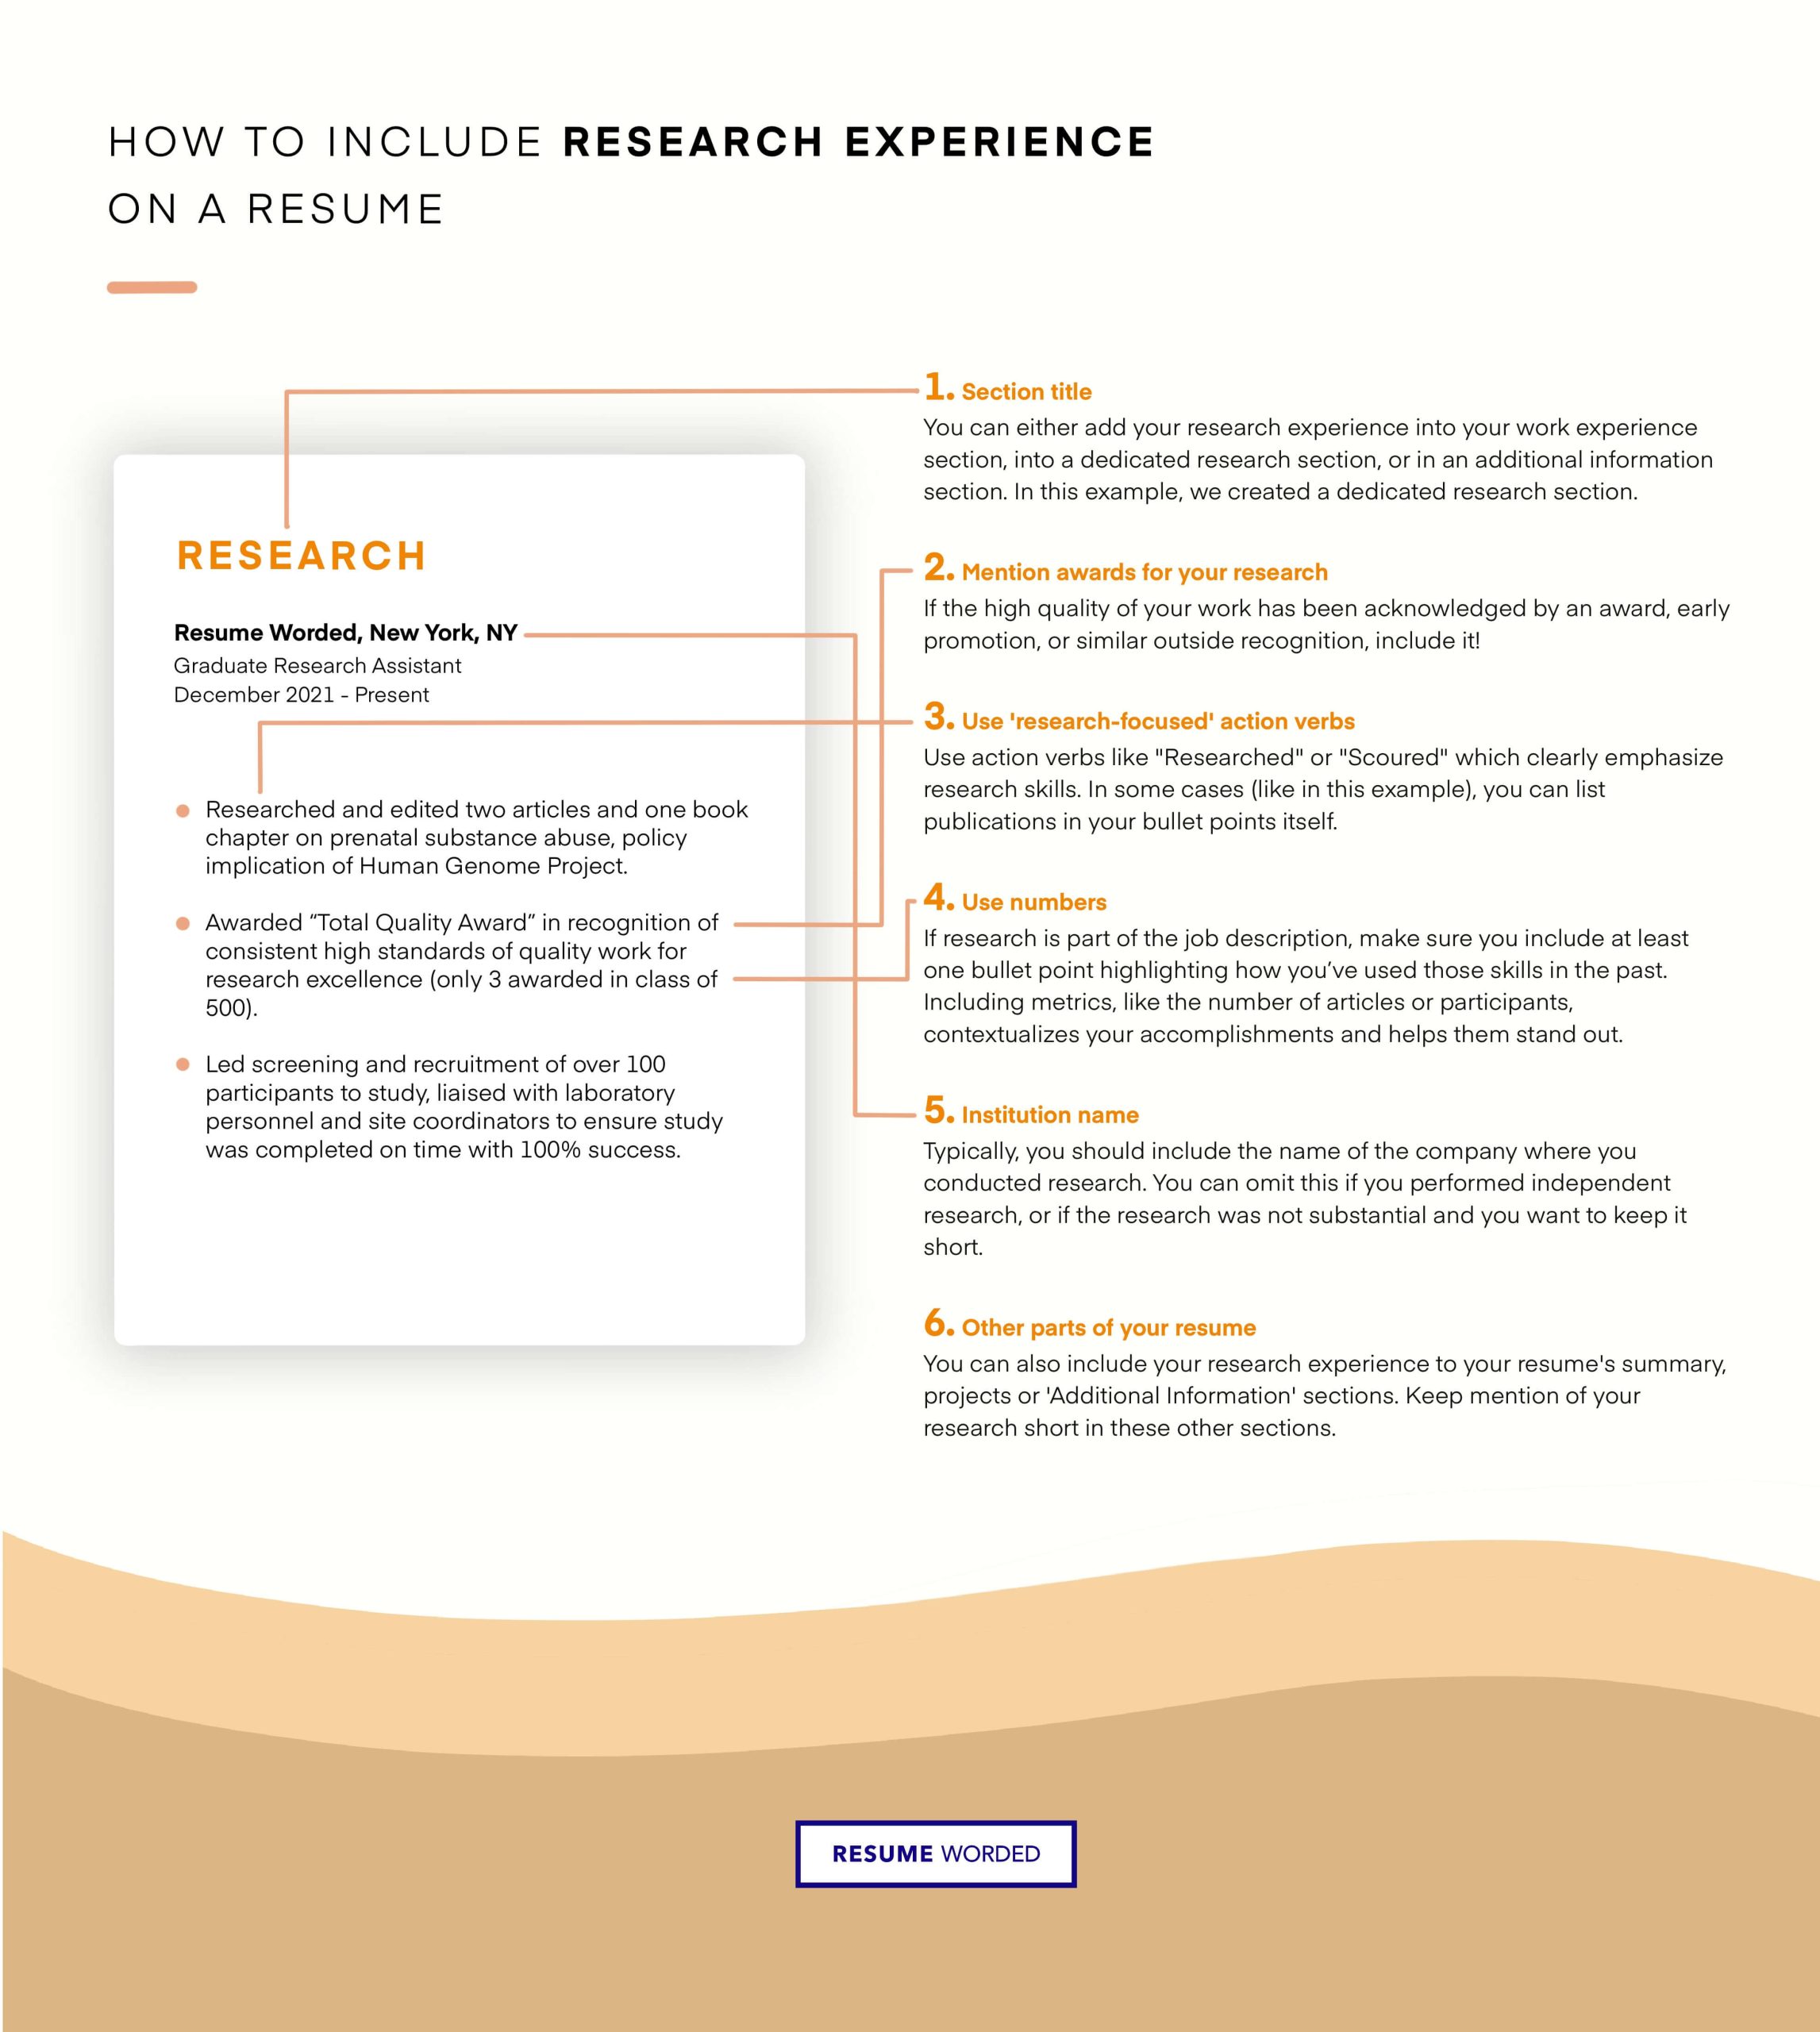 Sample Resume for Graduate Research assistant Graduate Research assistant Resume Example for 2022 Resume Worded